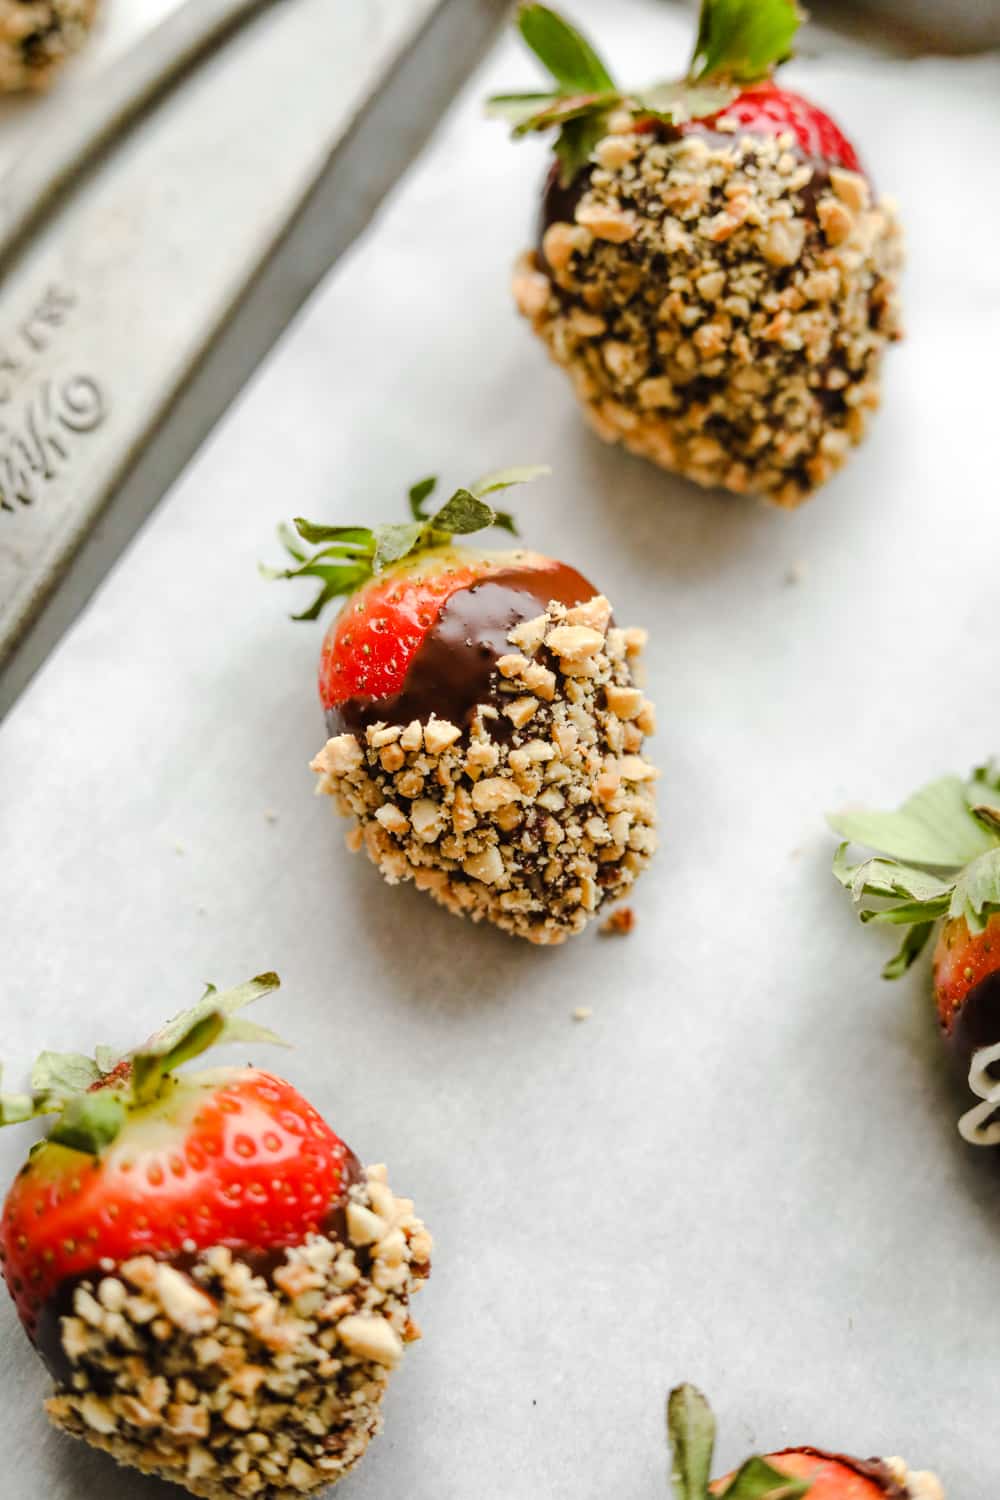 Chocolate covered strawberries dipped in crushed peanuts on a tray.